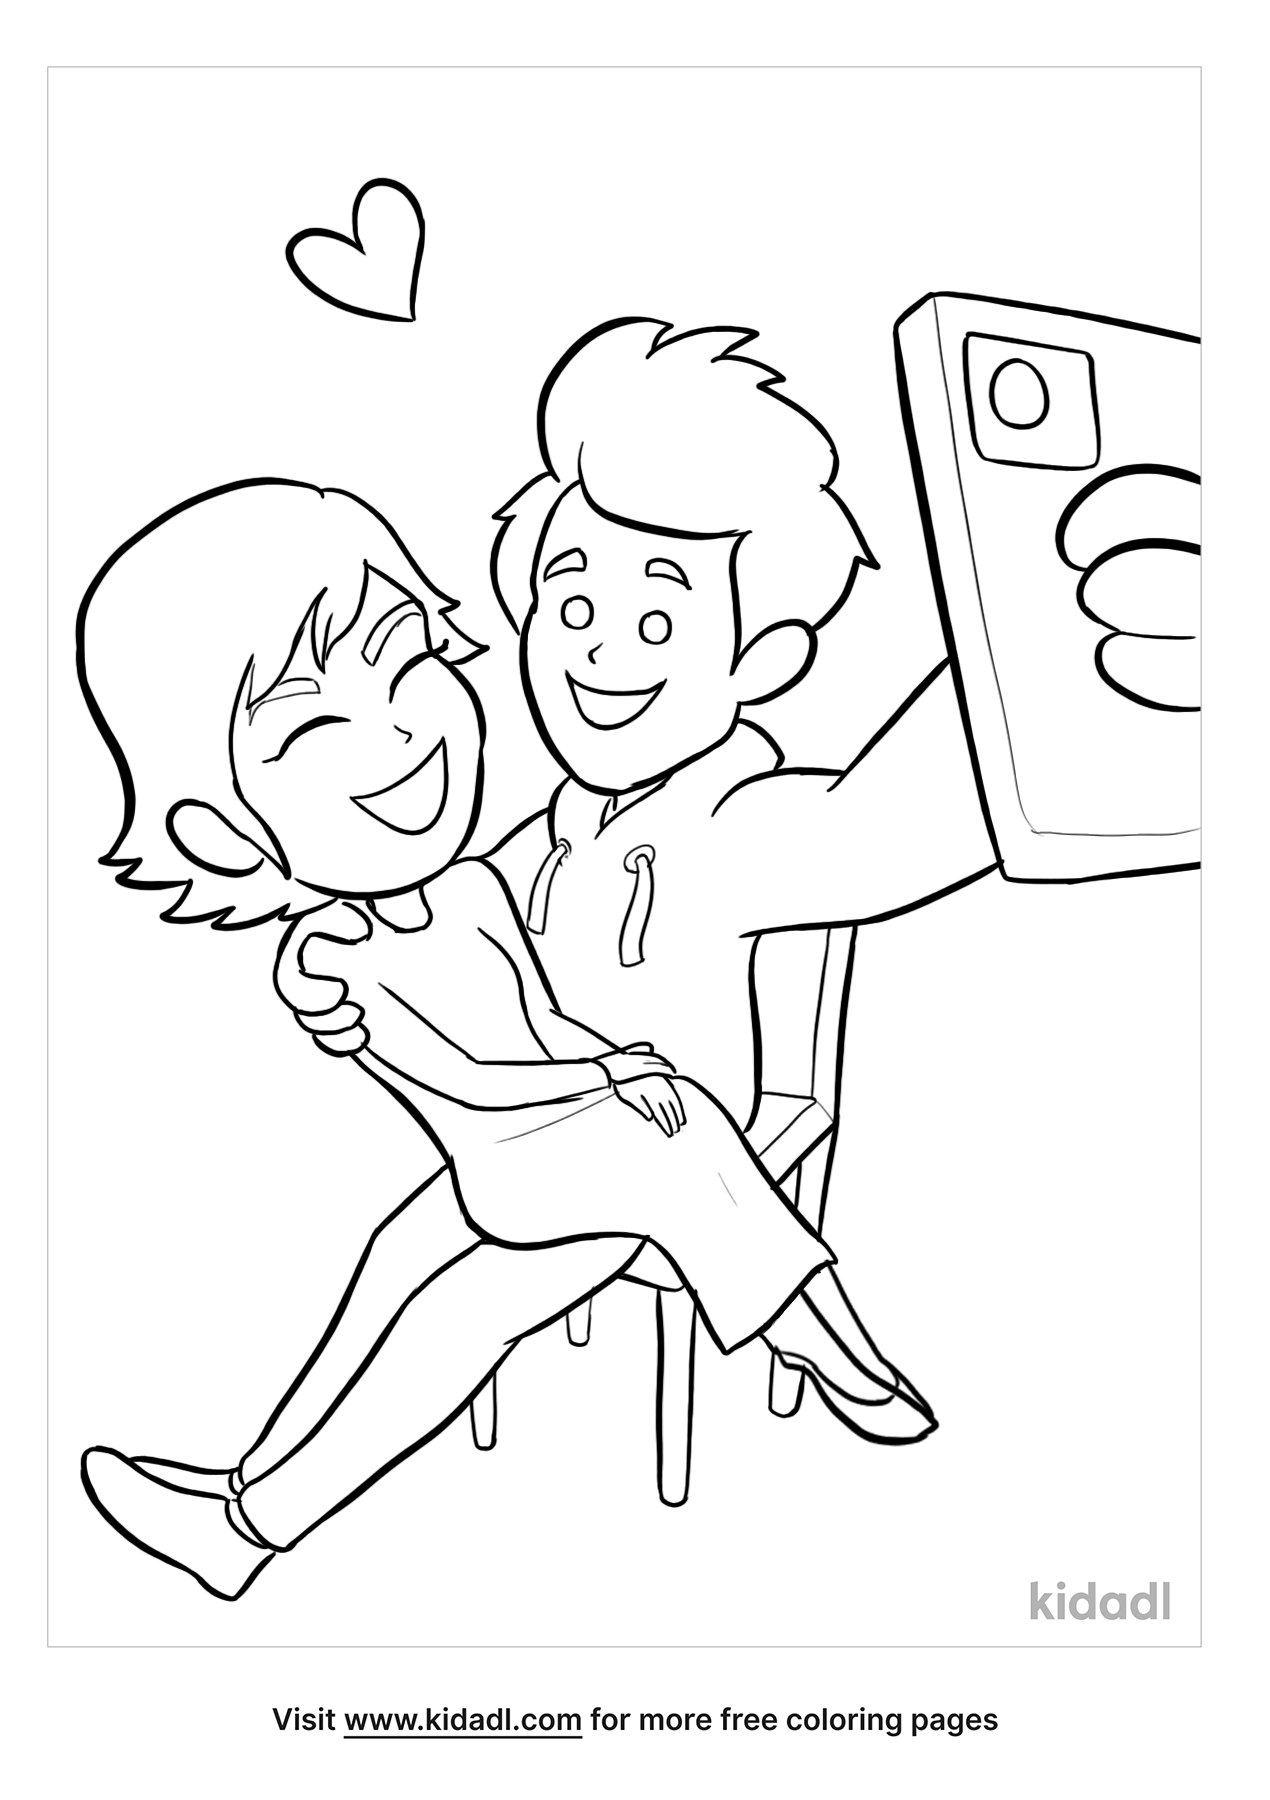 Boyfriend And Girlfriend Coloring Pages | Free Love Coloring Pages | Kidadl